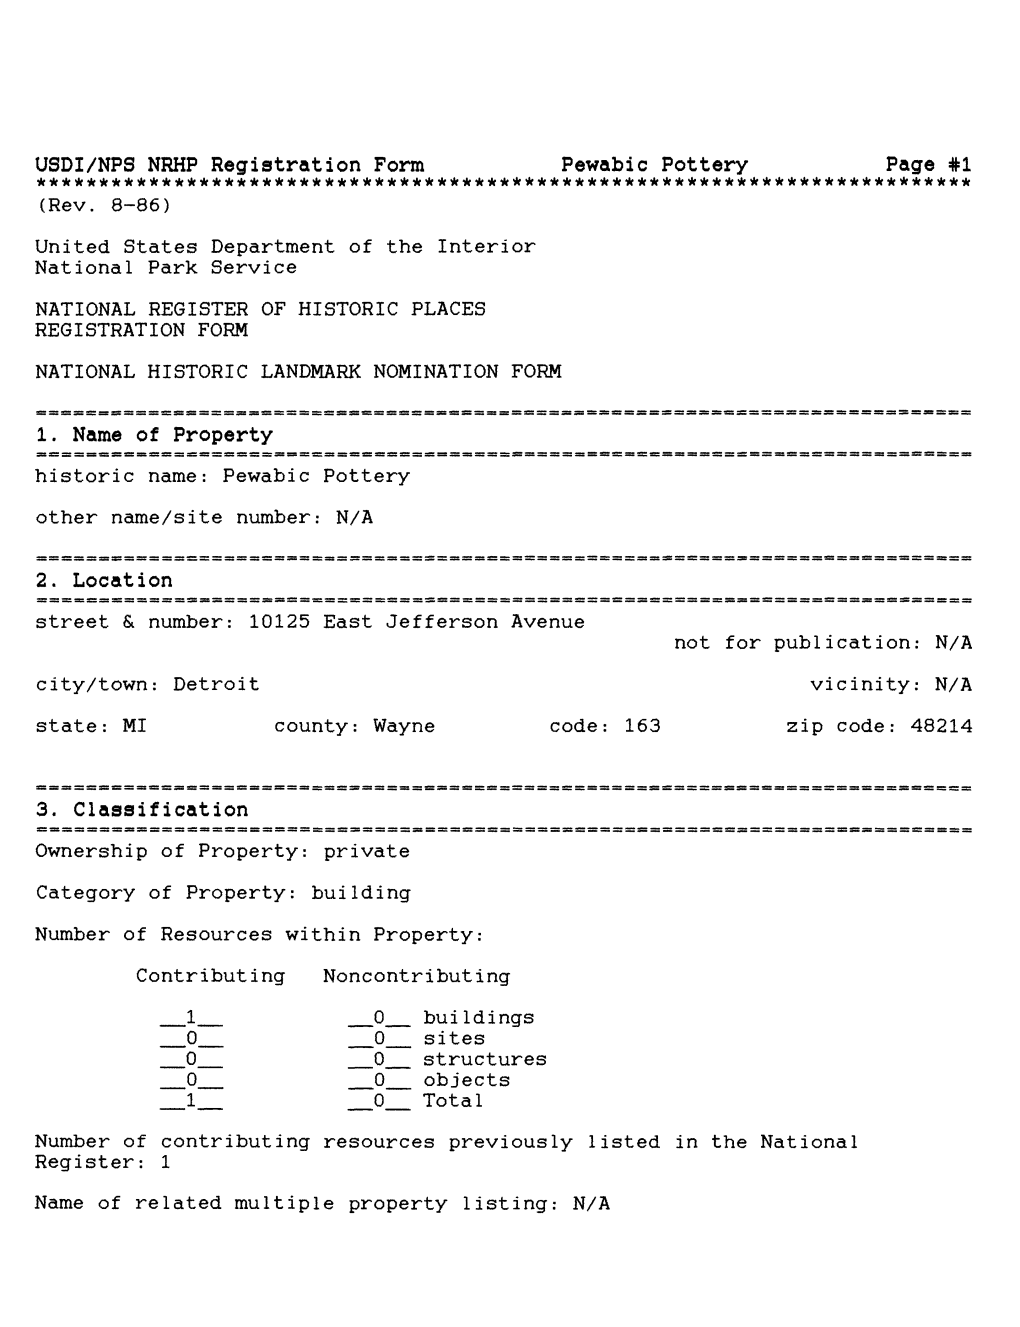 USDI/NPS NRHP Registration Form Pewabic Pottery Page #1 ******************************************Ii 1. Name of Property 2. Loca